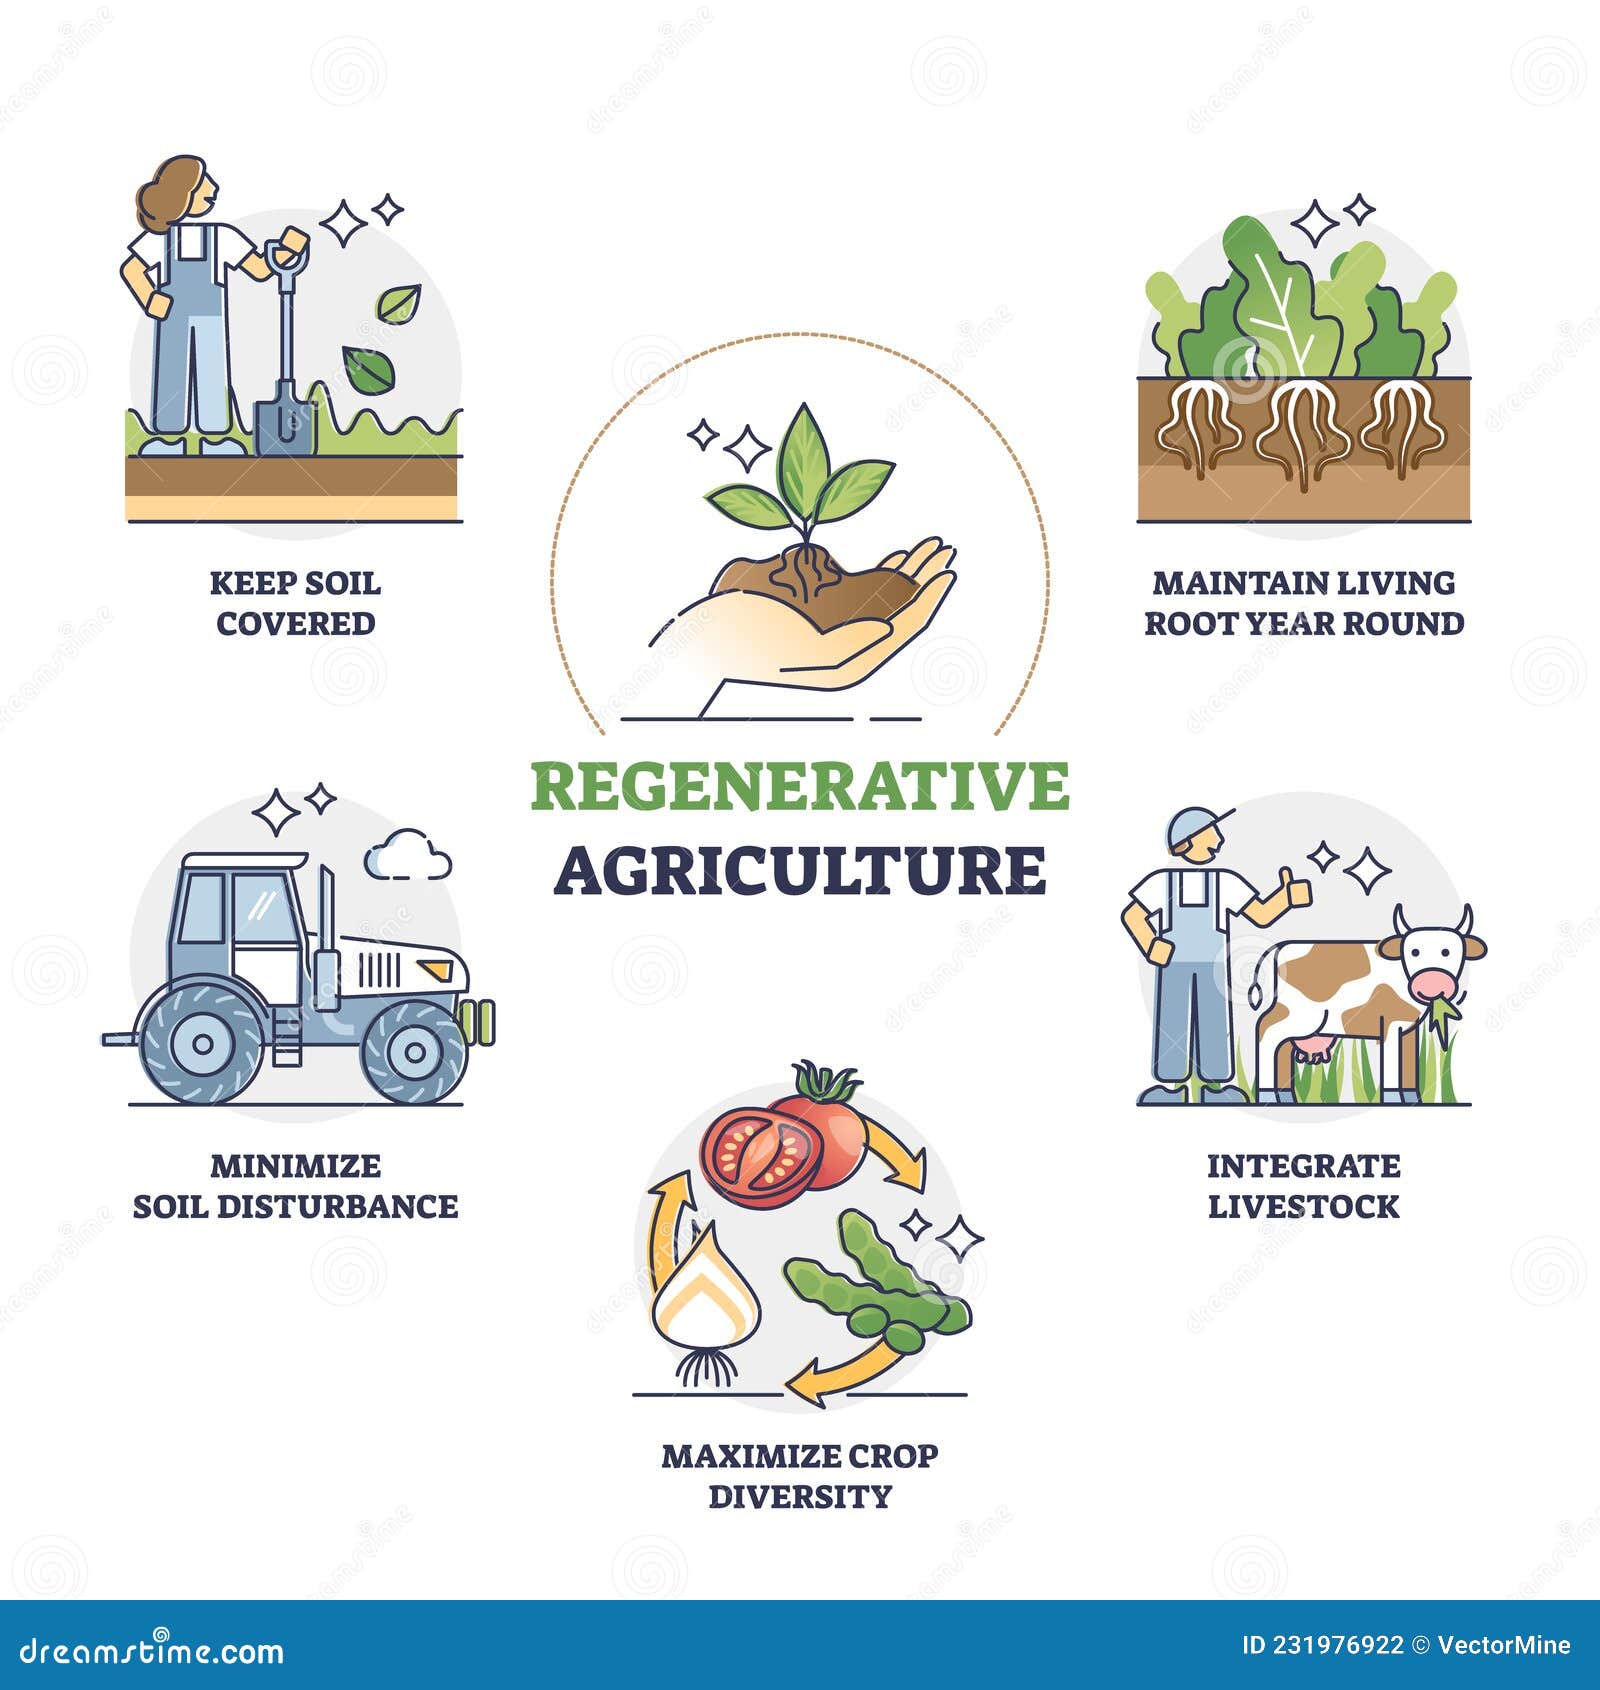 regenerative agriculture method for soil health and vitality outline diagram